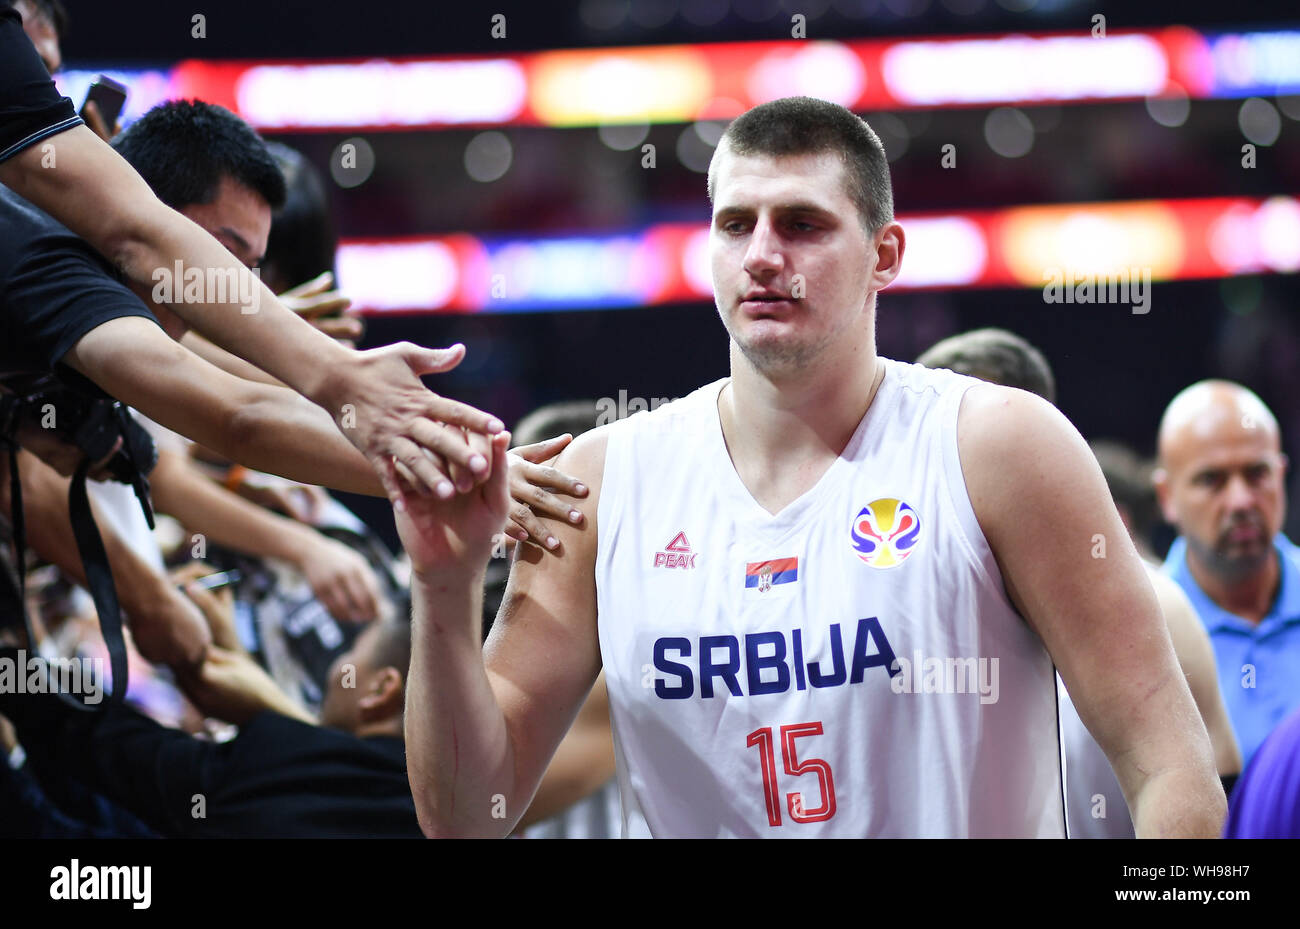 (190902) -- FOSHAN, Sept. 2, 2019 (Xinhua) -- Nikola Jokic of Serbia greet fans after the group D match between Serbia and the Philippines at the 2019 FIBA World Cup in Foshan, south China's Guangdong Province, Sept. 2, 2019. (Xinhua/Xue Yubin) Stock Photo